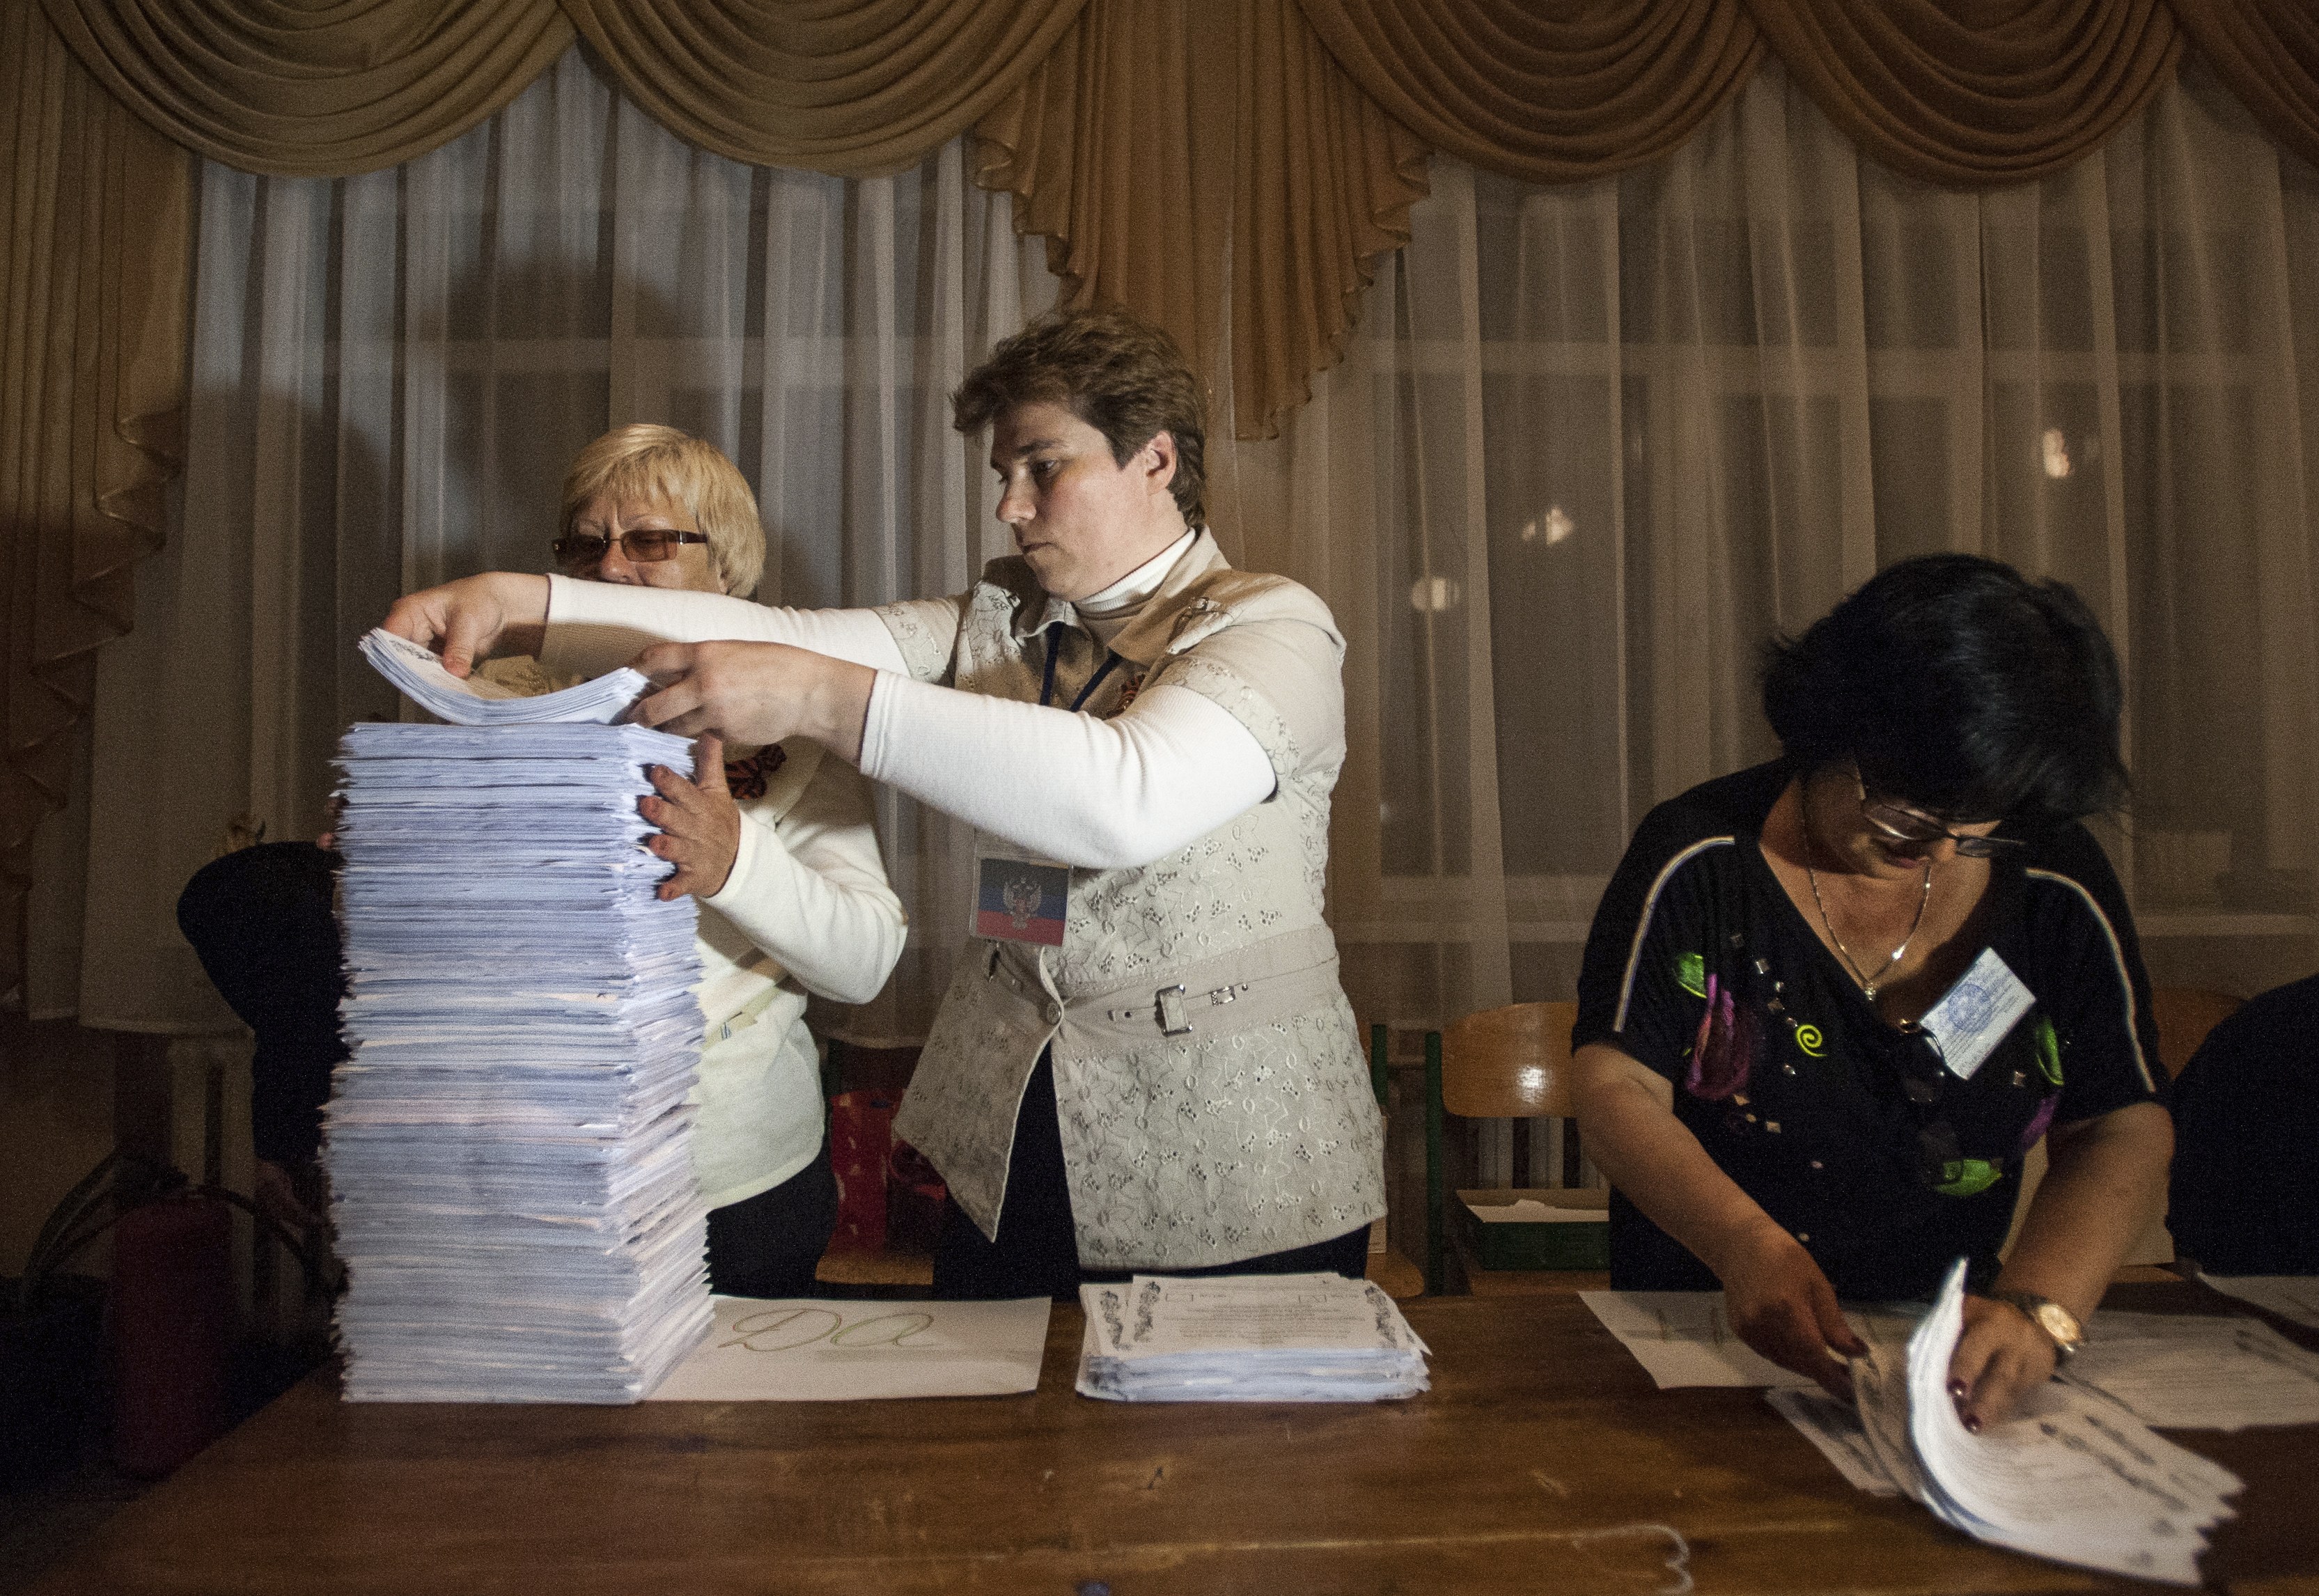 Members of an election committee empty a ballot box after voting closes at a polling station in Donetsk, Ukraine, Sunday, May 11, 2014. (Evgeniy Maloletka—AP)